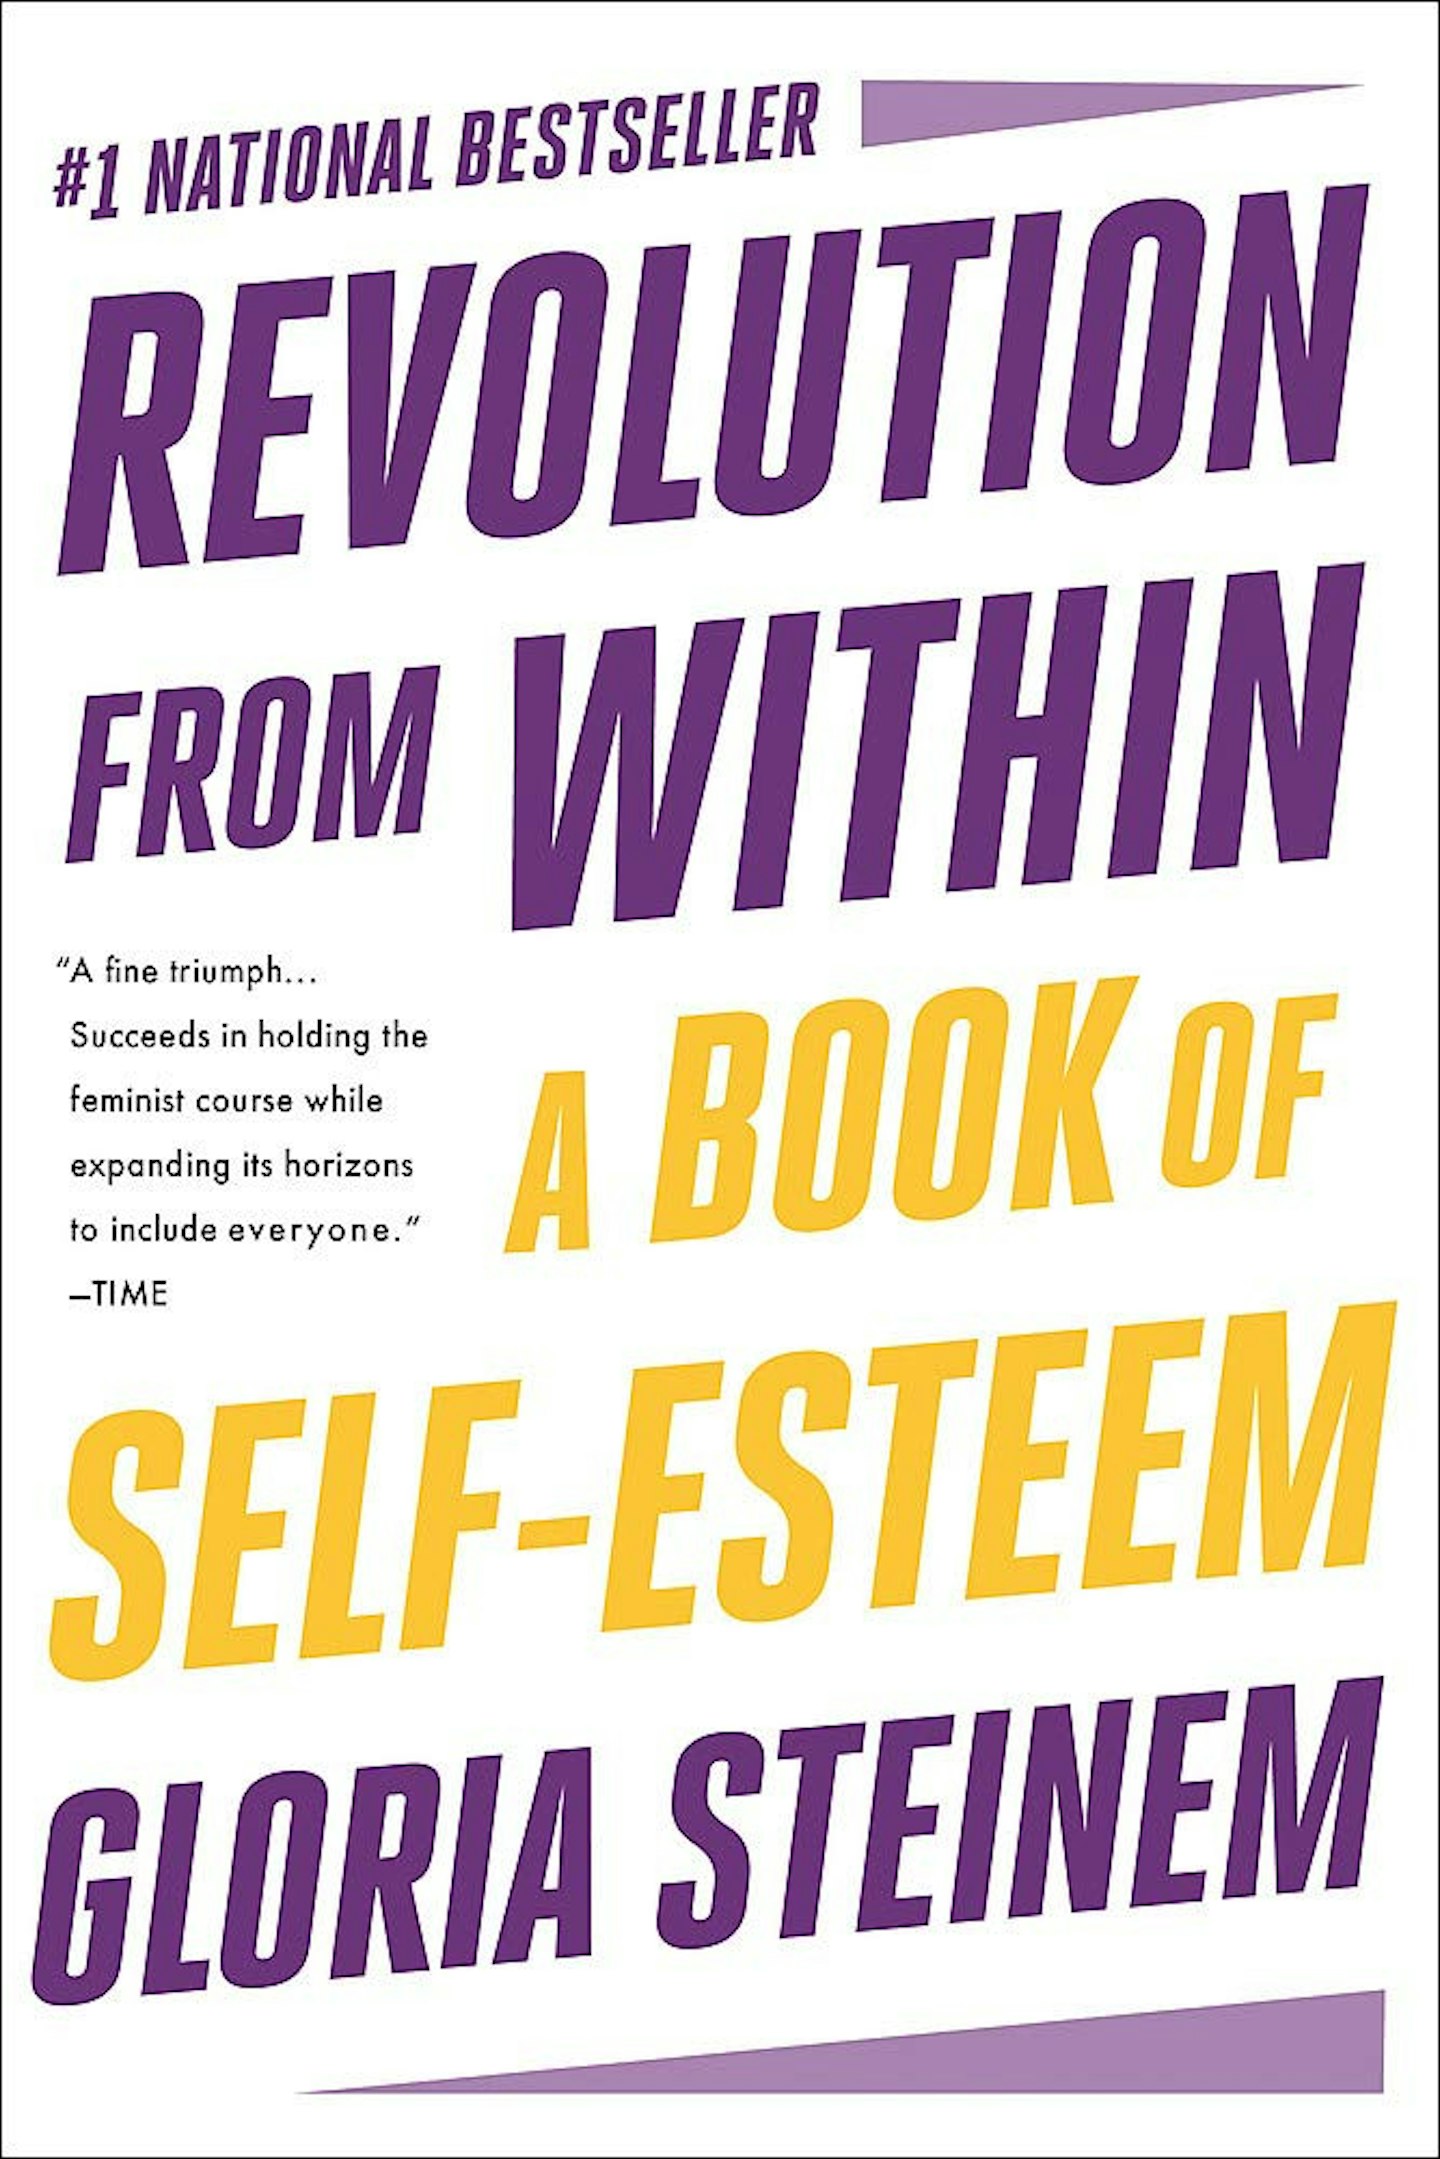 Revolution from Within: A Book of Self-Esteem, by Gloria Steinem